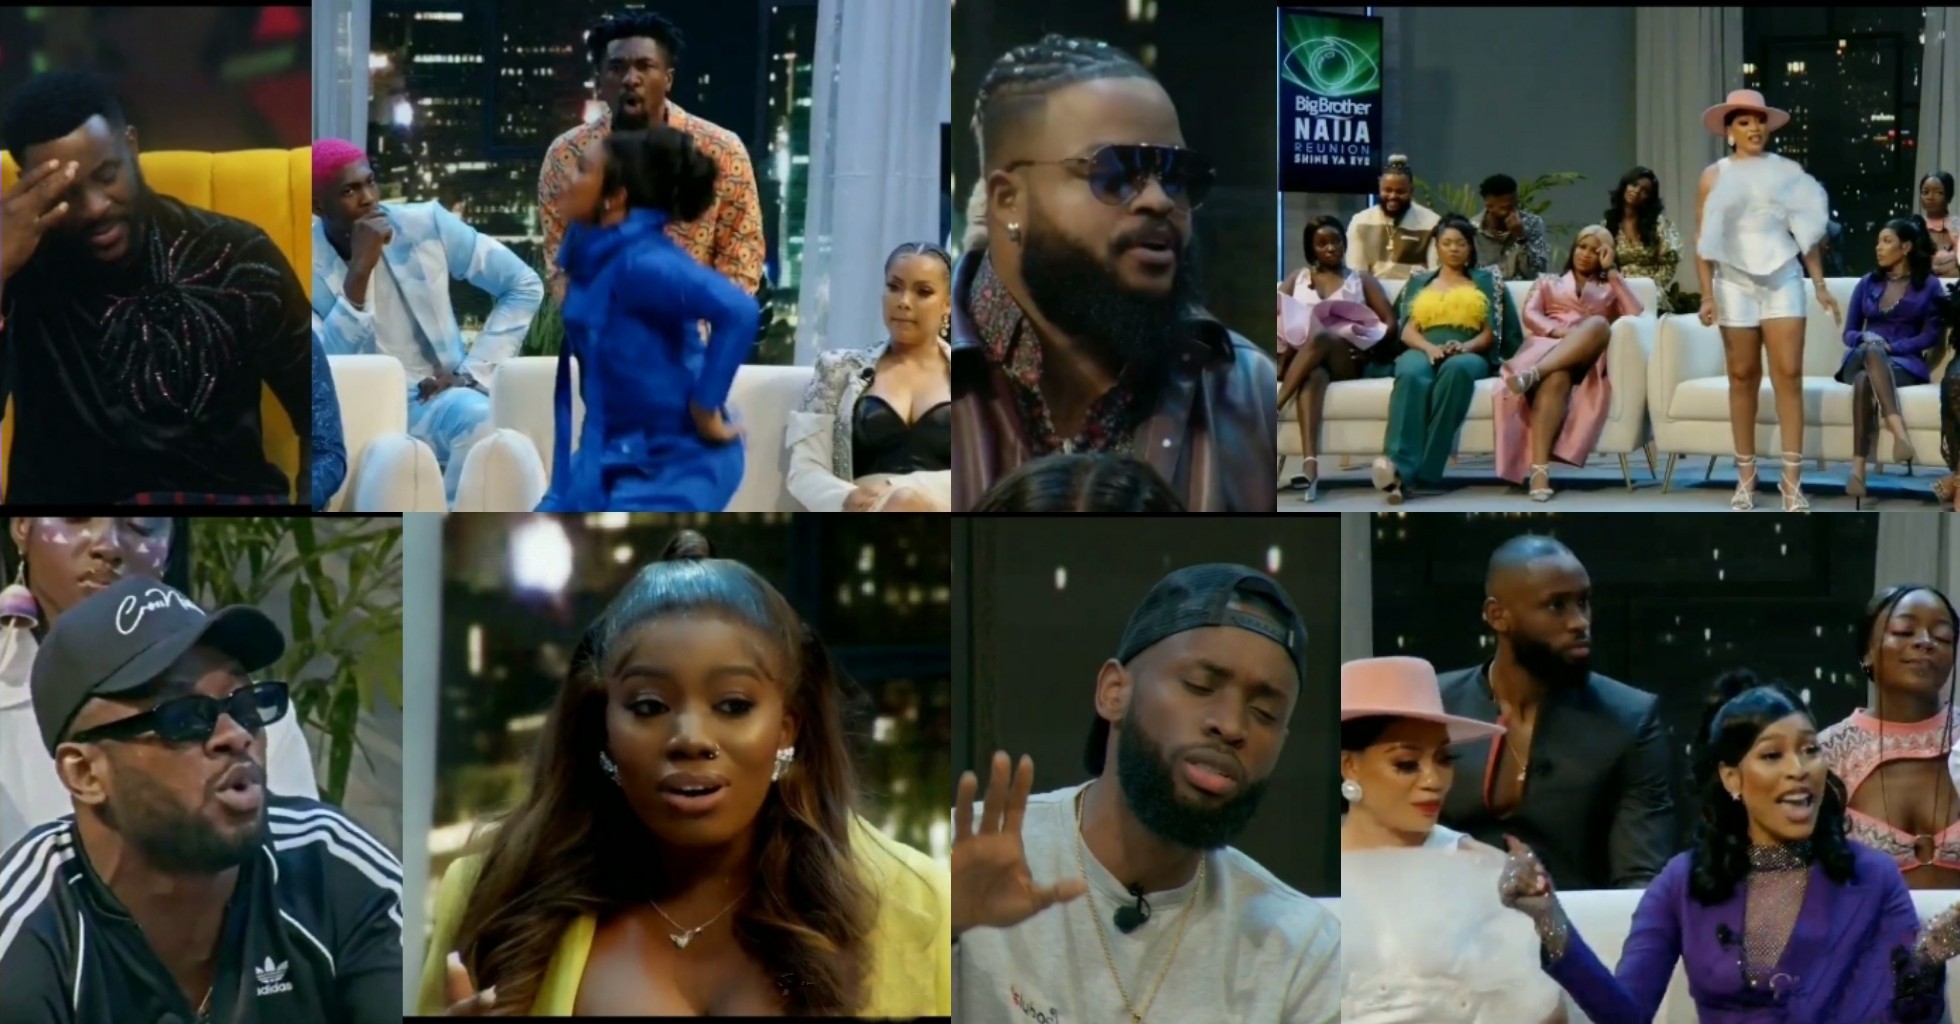 BBNaija Reunion: Housemates lose temper, get into heated confrontation in new suspense-filled trailer [VIDEO]